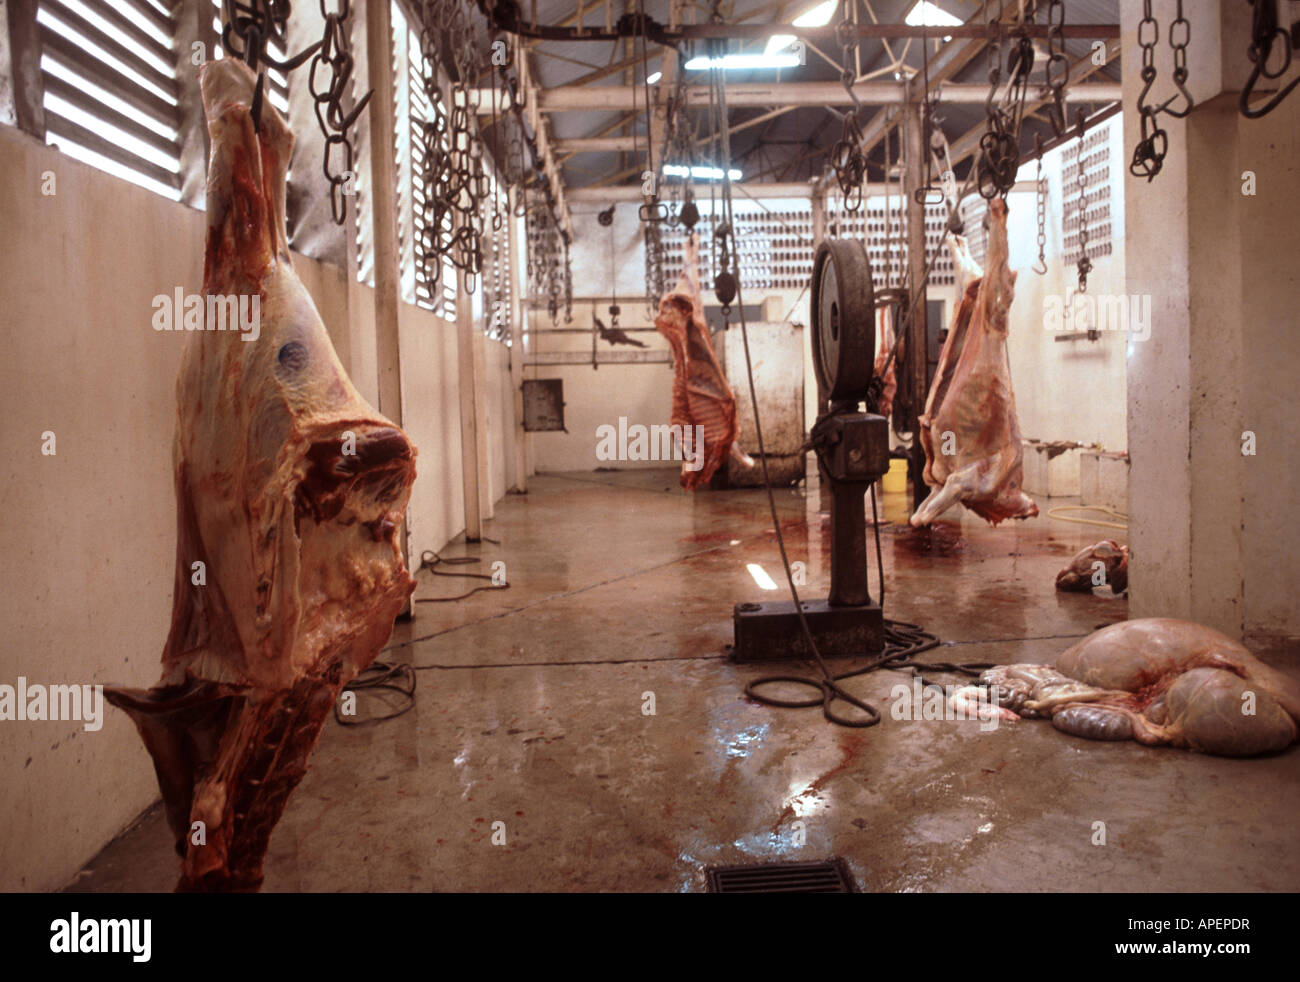 Cattle Slaughtering Stock Photos & Cattle Slaughtering 